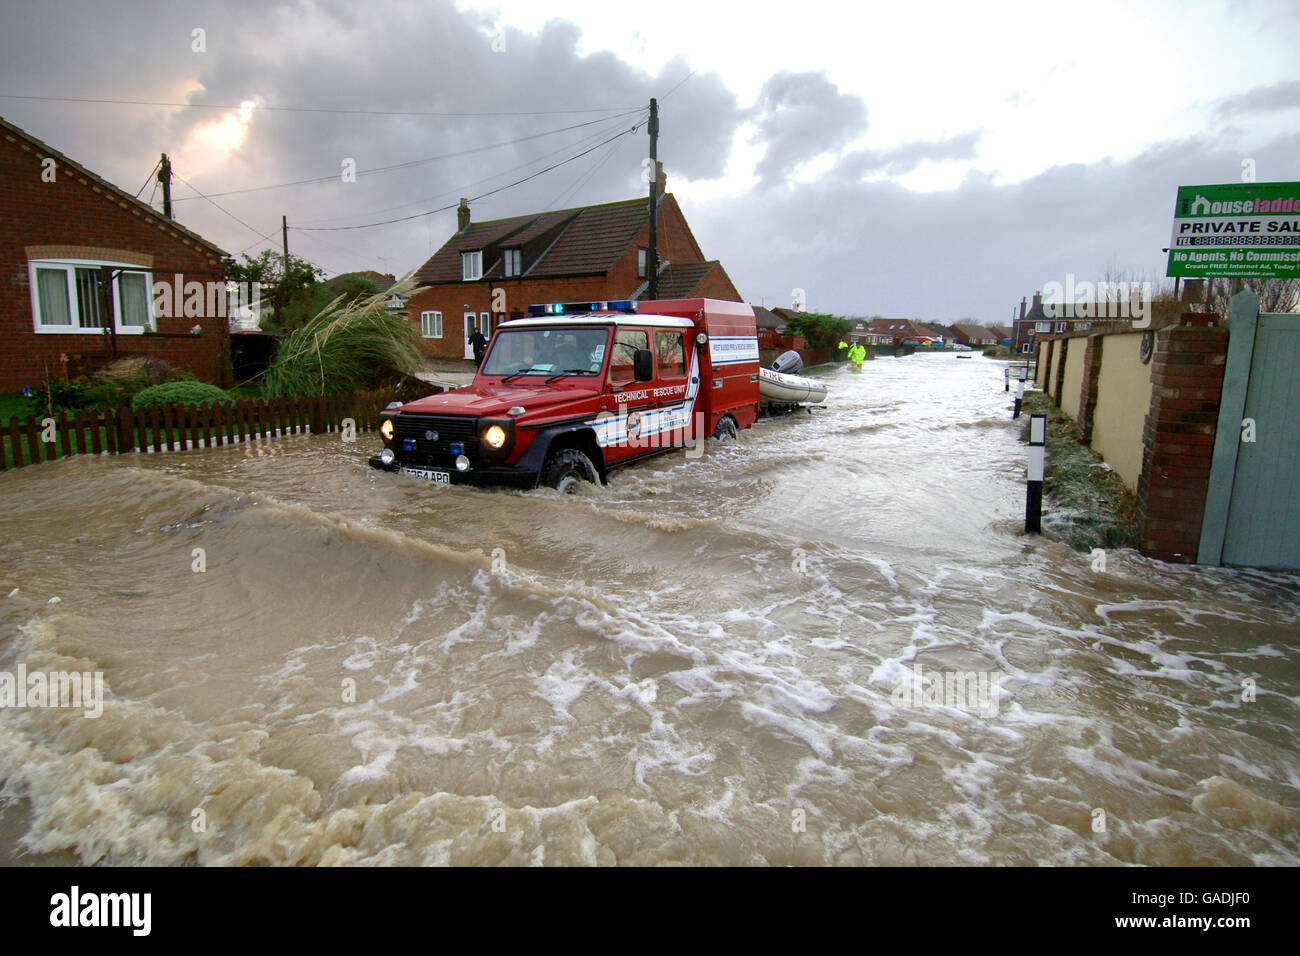 A Fire Rescue vehicle makes its way through a flooded street at Walcott near Great Yarmouth. Stock Photo